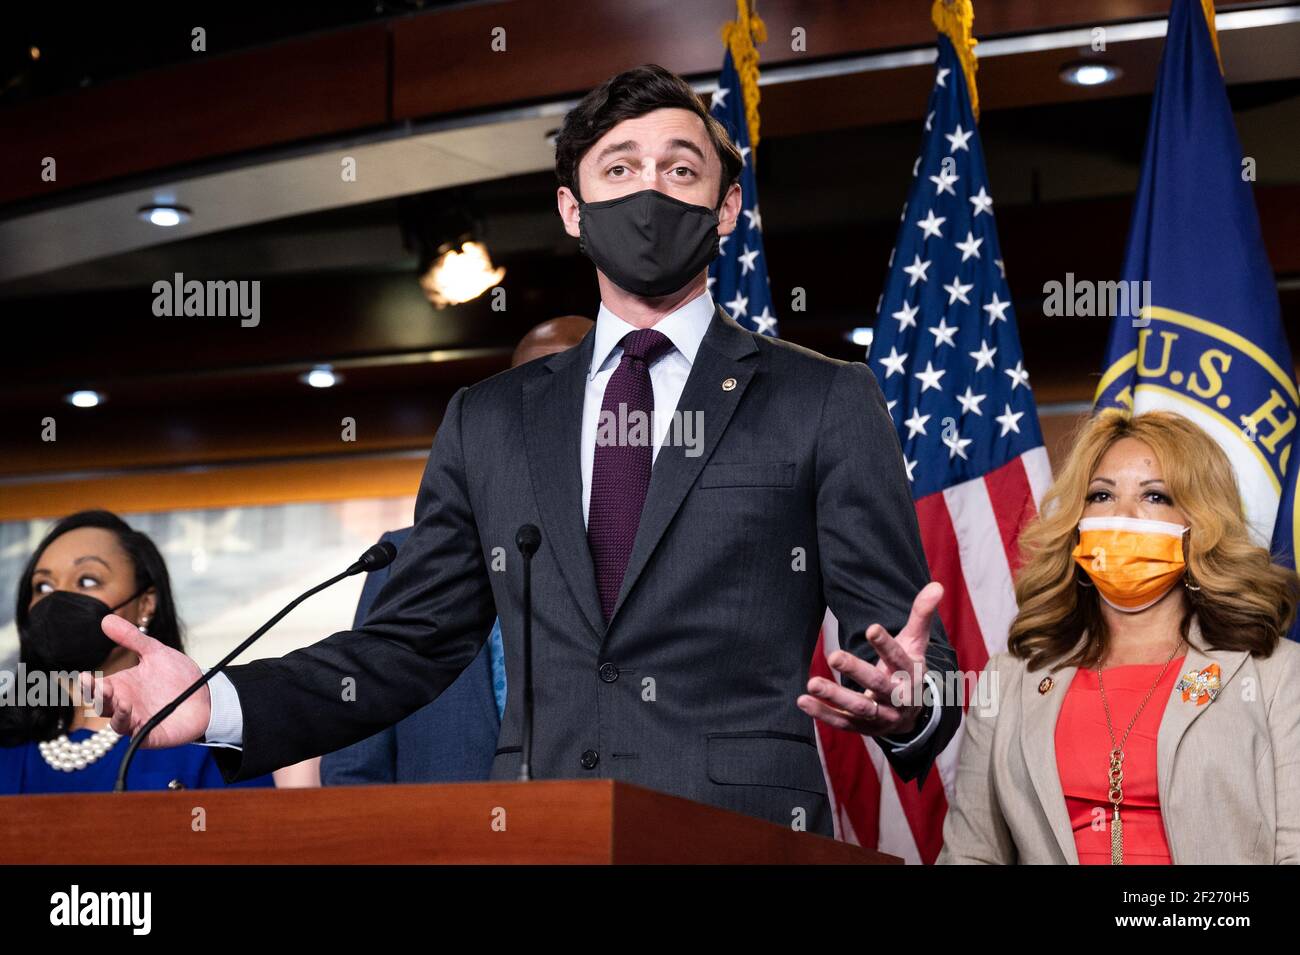 U.S. Senator Jon Ossoff (D-GA) speaks at a press conference about the American Rescue Plan's benefits for Georgia. Stock Photo